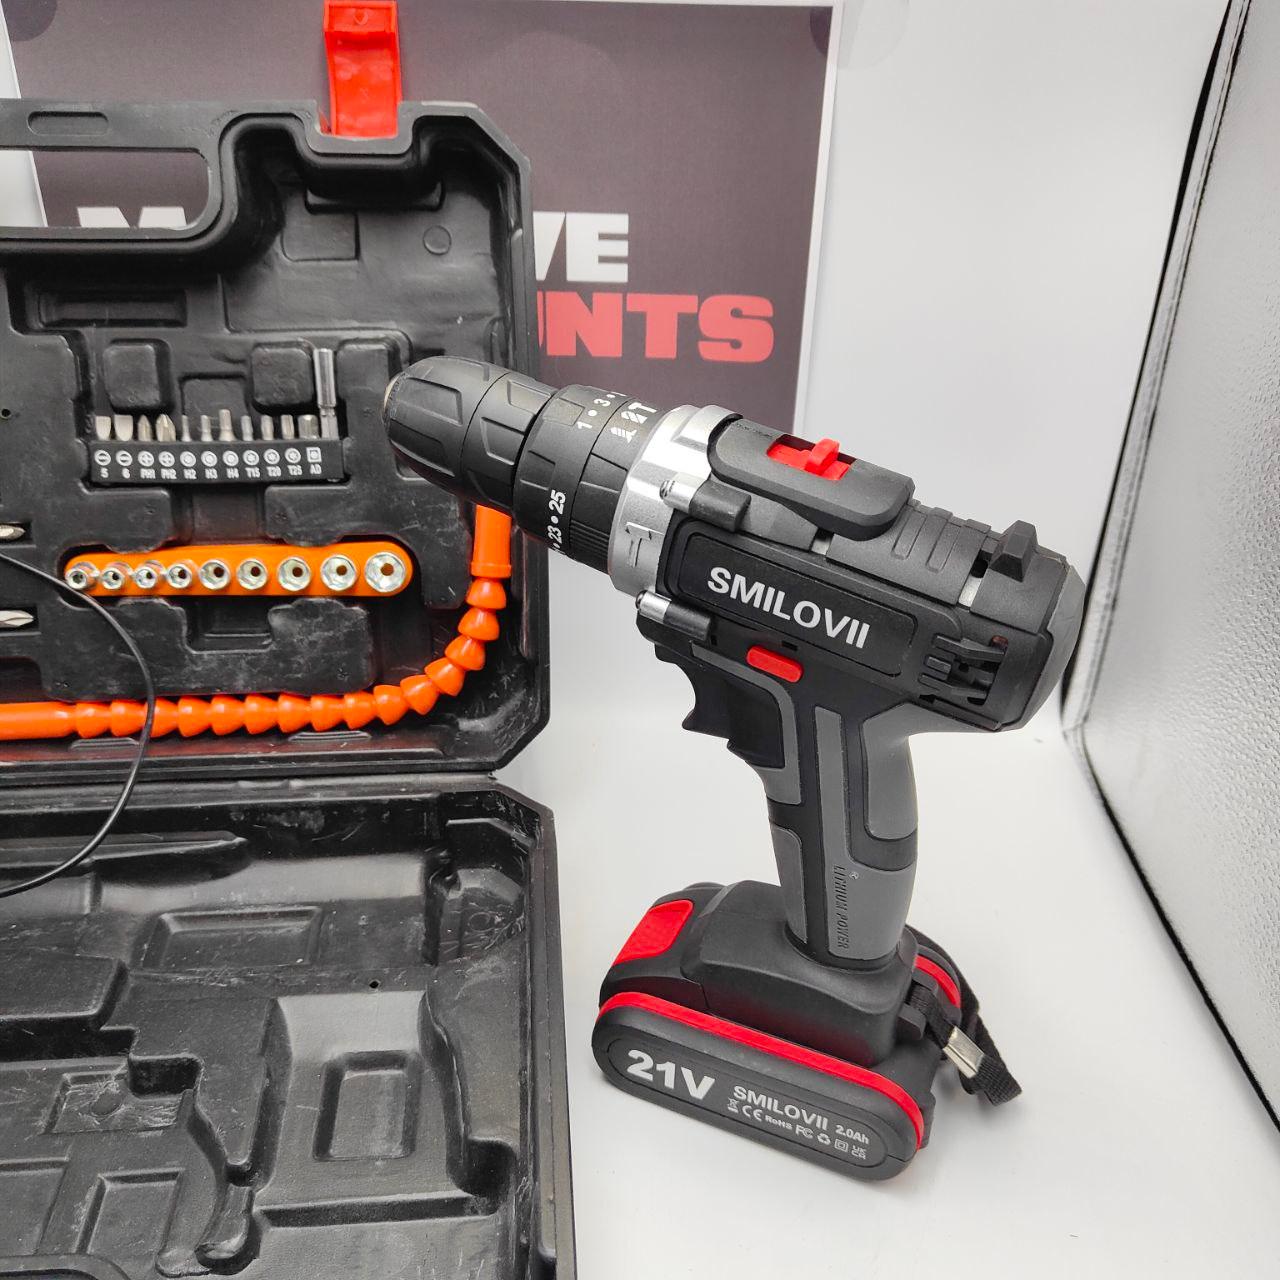 Electric Screwdriver Set, 21V Cordless Drill With 2 Batteries - Massive Discounts